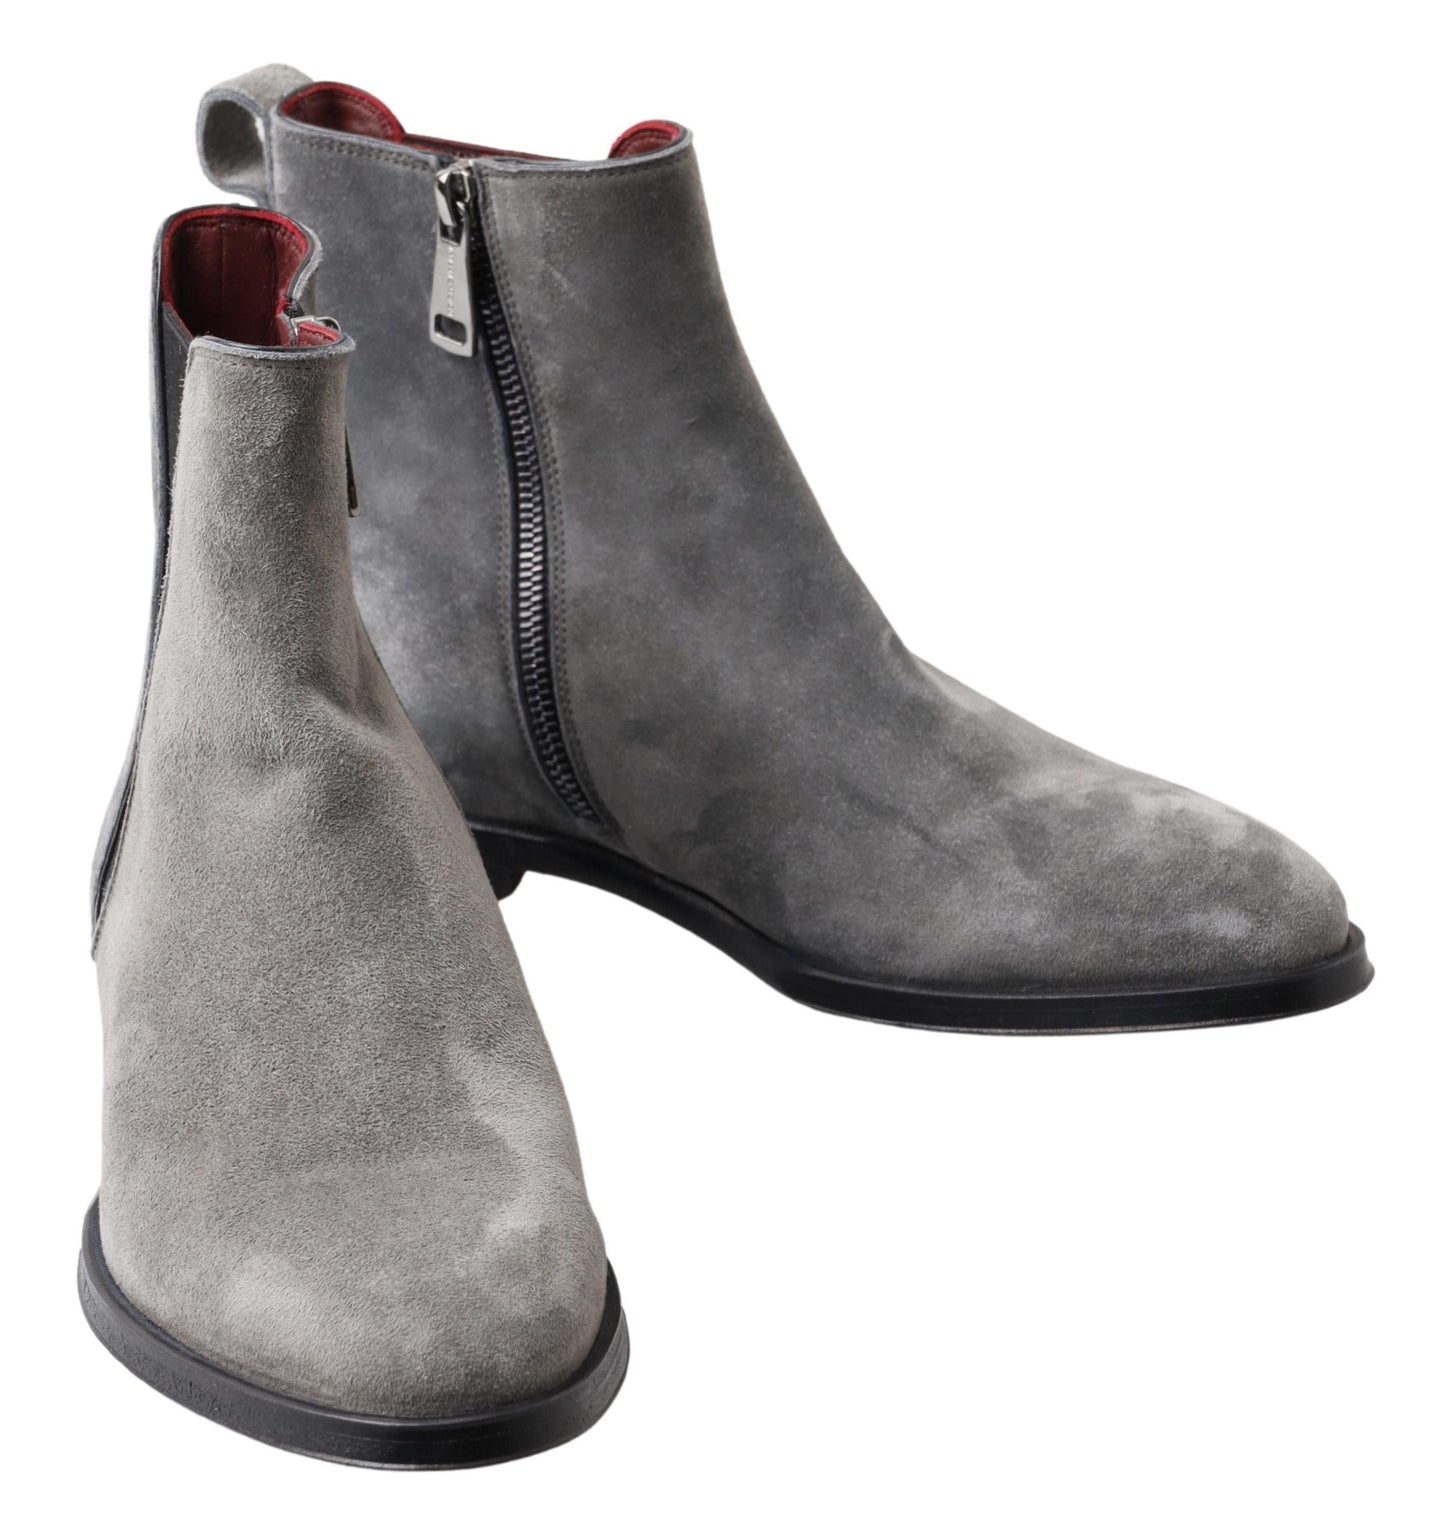 Dolce & Gabbana Grey Leather Men Hommes Boots Chaussures